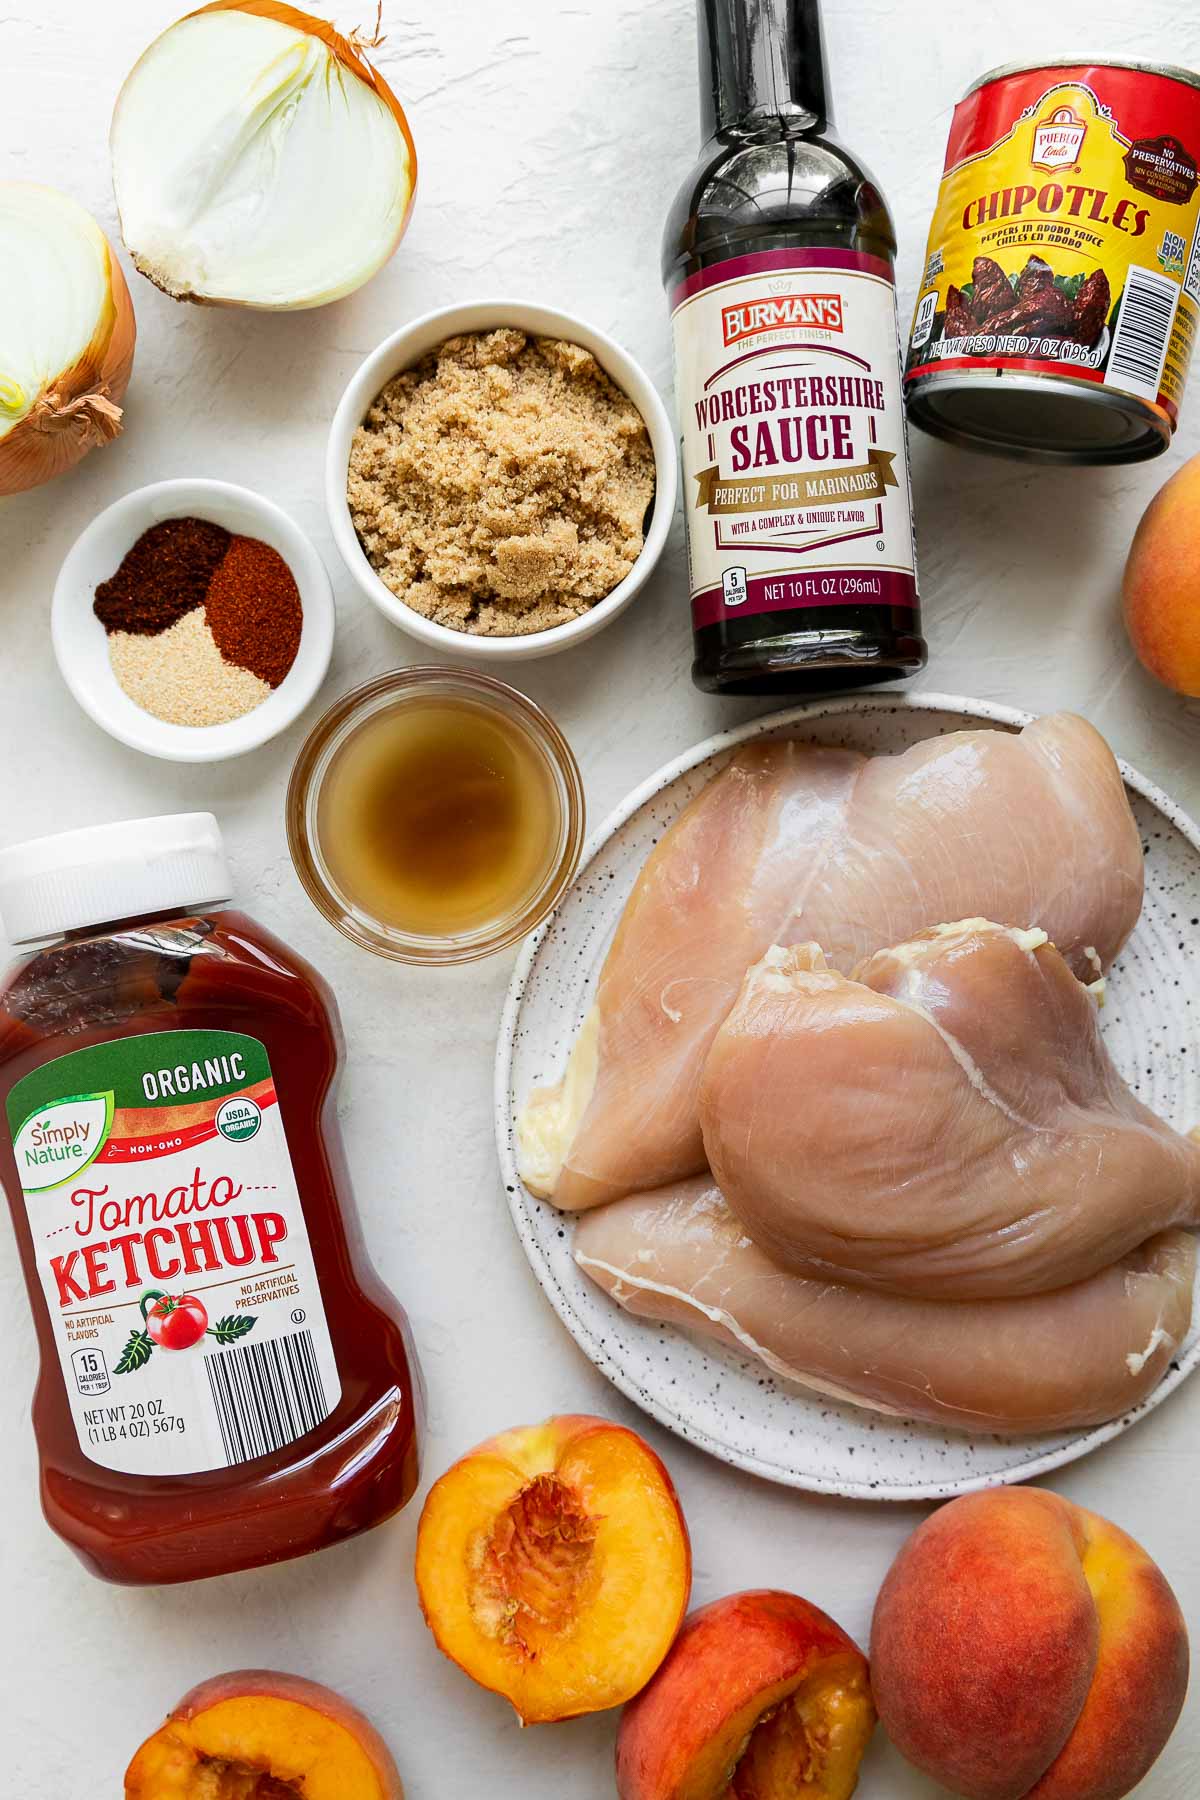 Peach bbq chicken and peach bbq sauce ingredients arranged on a creamy white textured surface: bonless, skinless chicken breasts, Stonemill Chili Powder, Stonemill Garlic Powder, Stonemill Paprika, Simply Nature Avocado Oil, peaches, Pueblo Lindo Chipotle Peppers, brown sugar, Simply Nature Organic Apple Cider Vinegar, Simply Nature Organic Ketchup, Burman's Worcestershire Sauce, kosher salt, and ground black pepper.